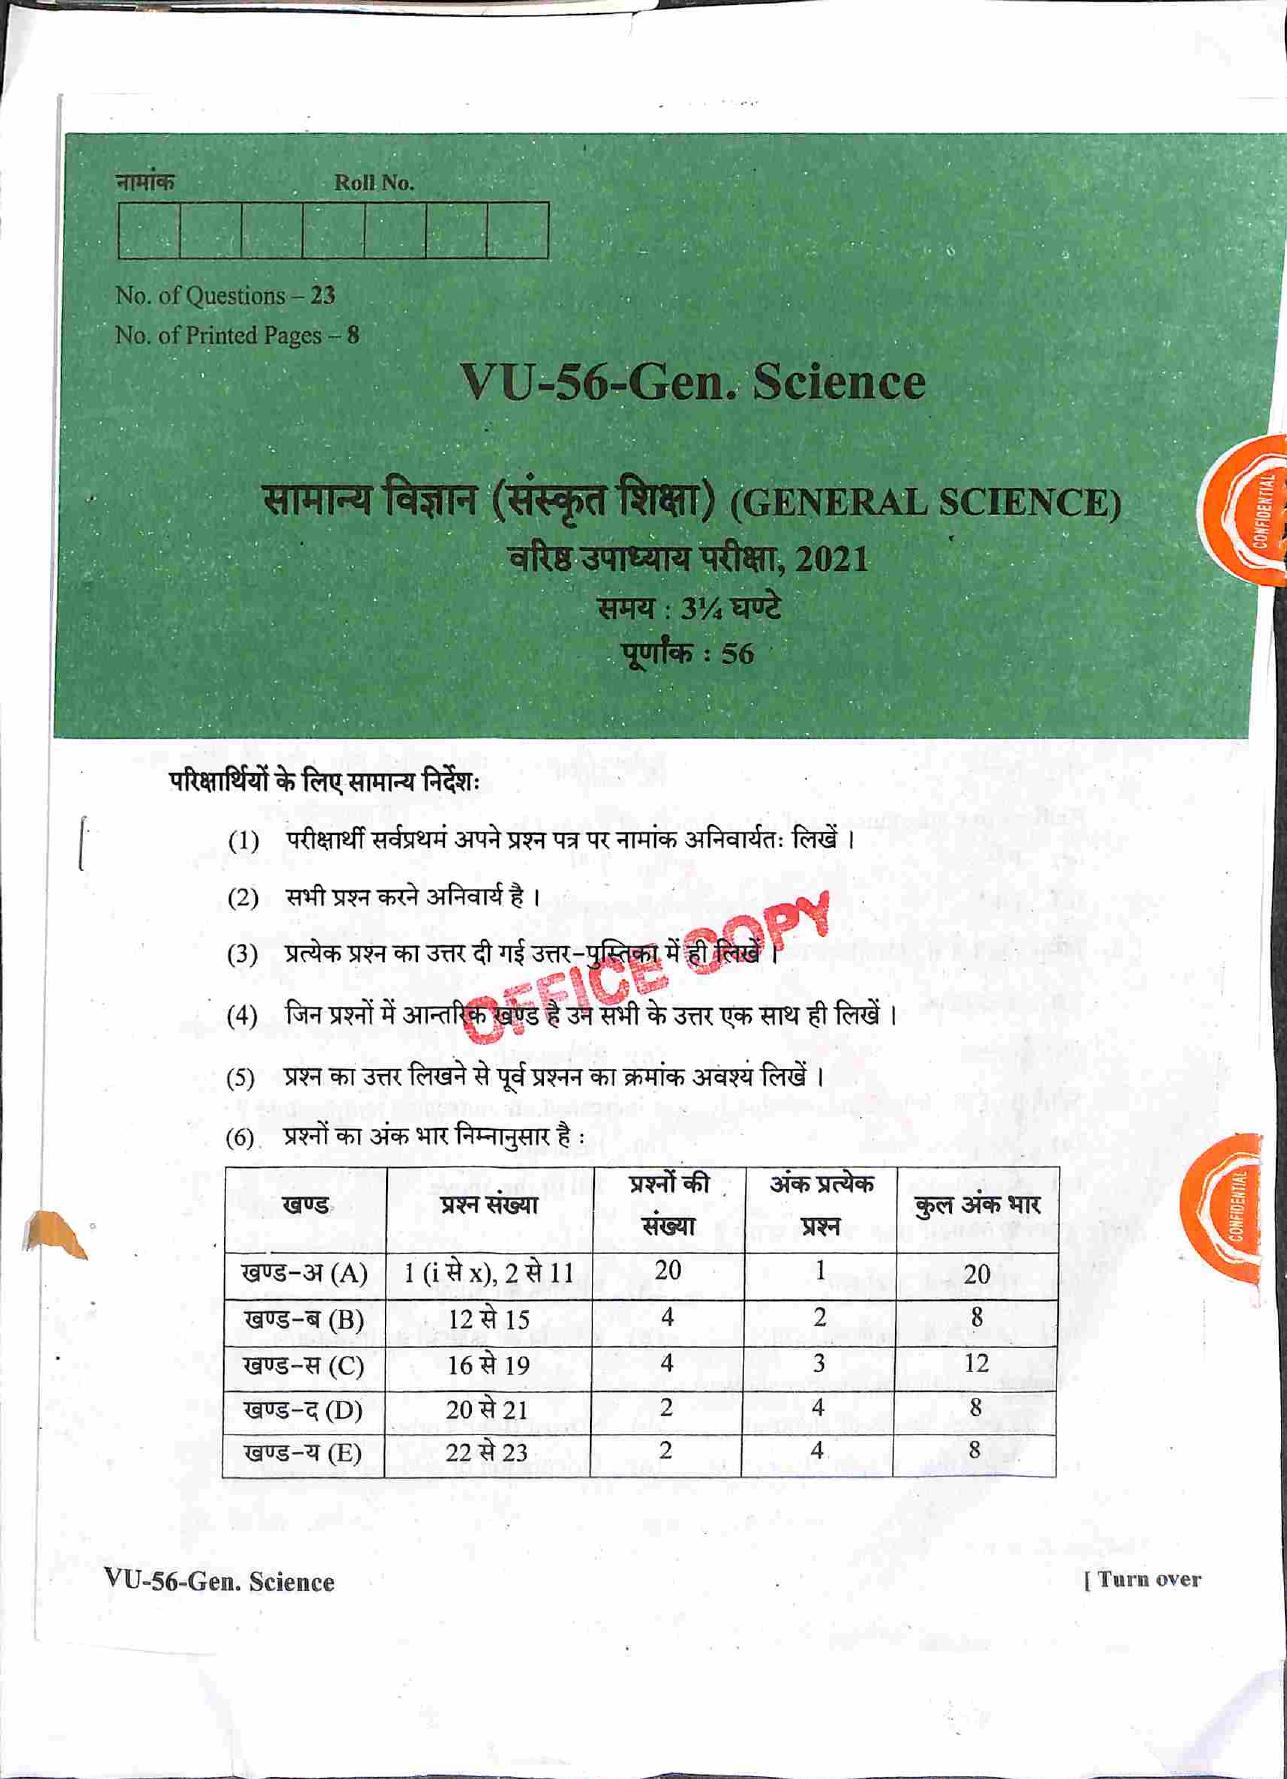 RBSE 2021 General Science Upadhyay Question Paper - Page 2